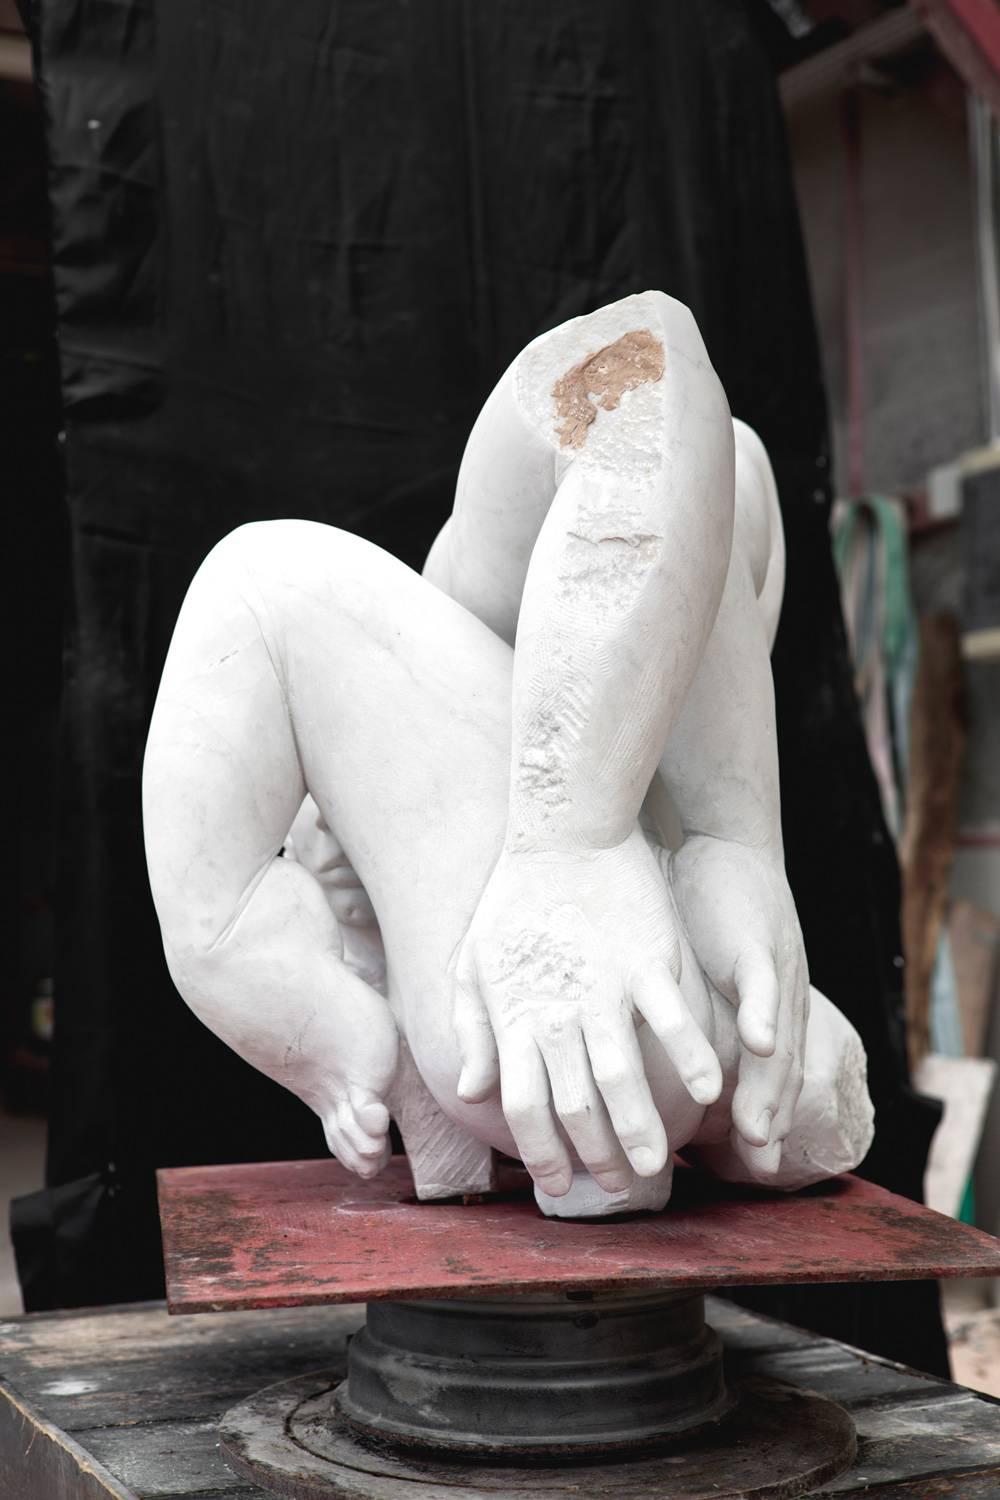 Embrione - hand carved abstract figurative nude white Carrara marble sculpture - Contemporary Sculpture by Lorenzo Vignoli